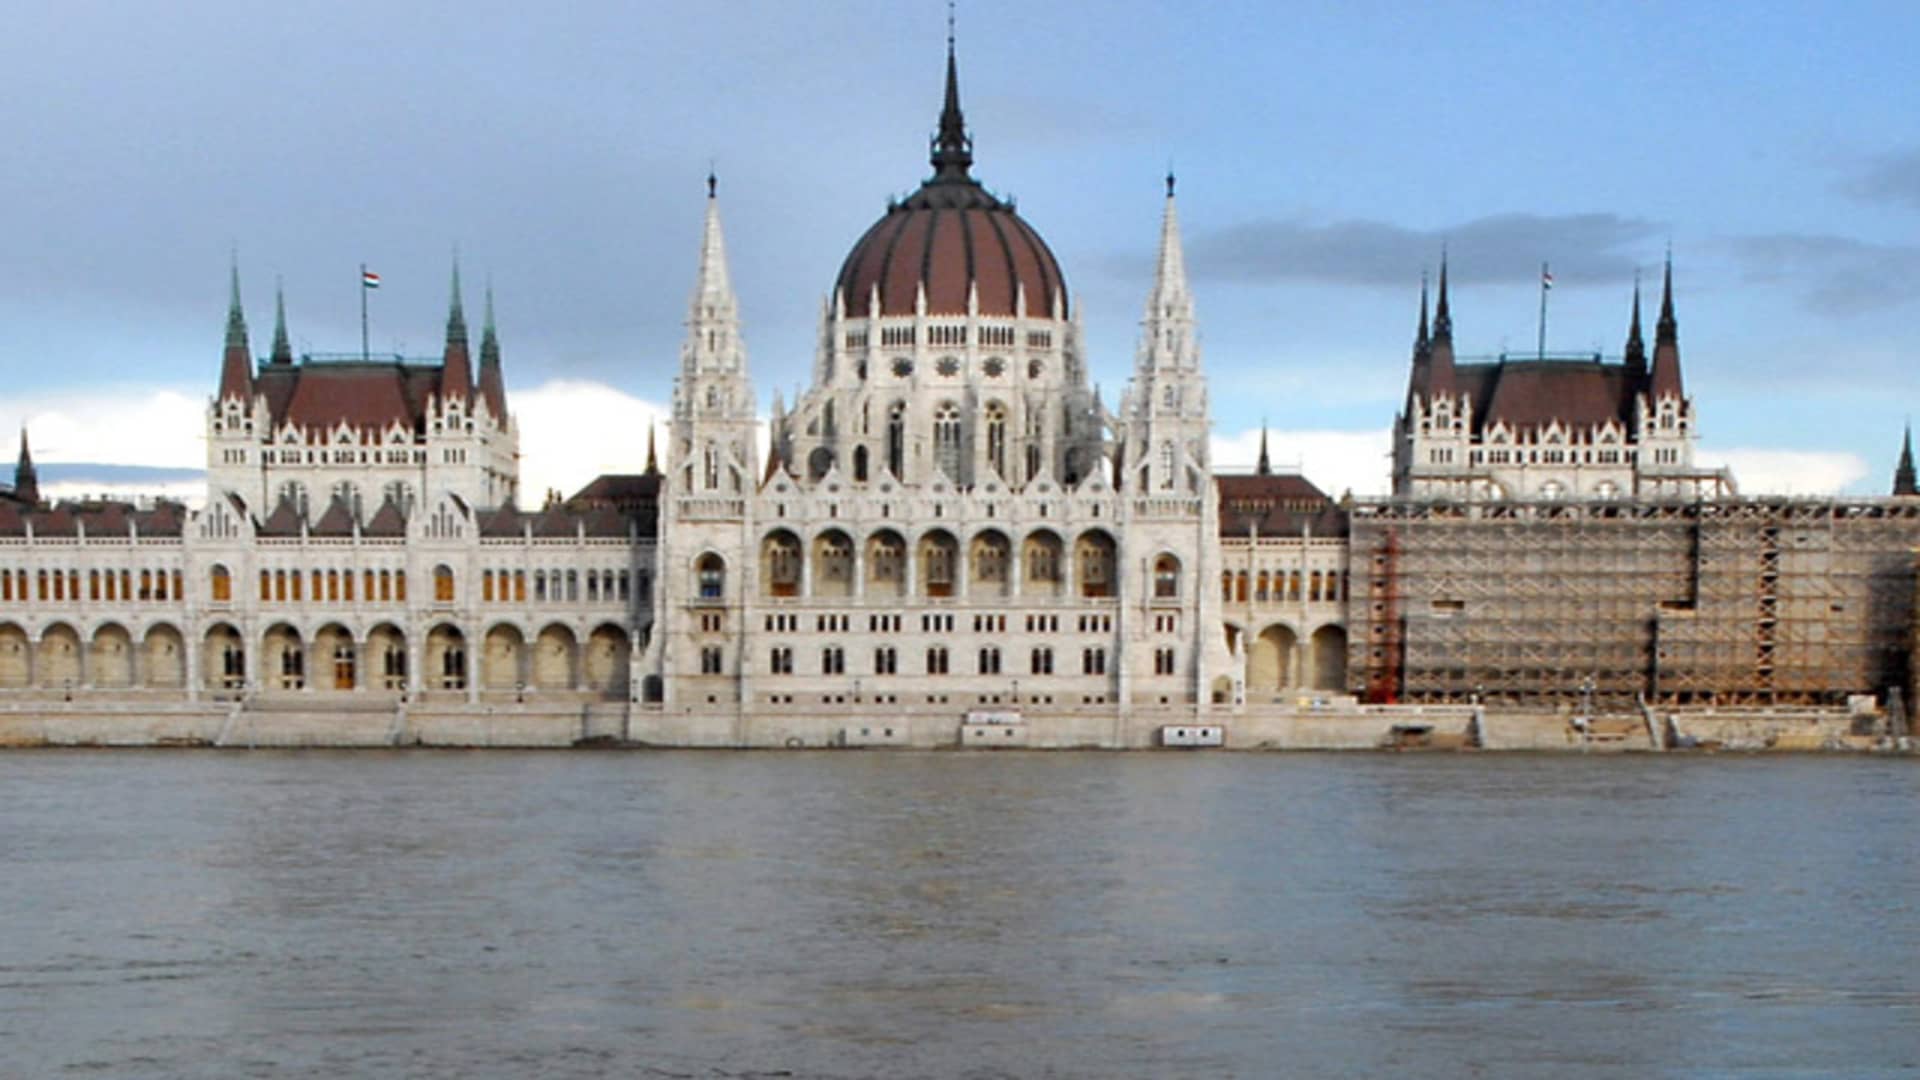 The flooded Danube river is seen in front of the Hungarian Parliament building in Budapest, Tuesday, Sept. 11, 2007. The river is expected to reach its peak level in the Hungarian capital Wednesday. (AP Photo/Bela Szandelszky)